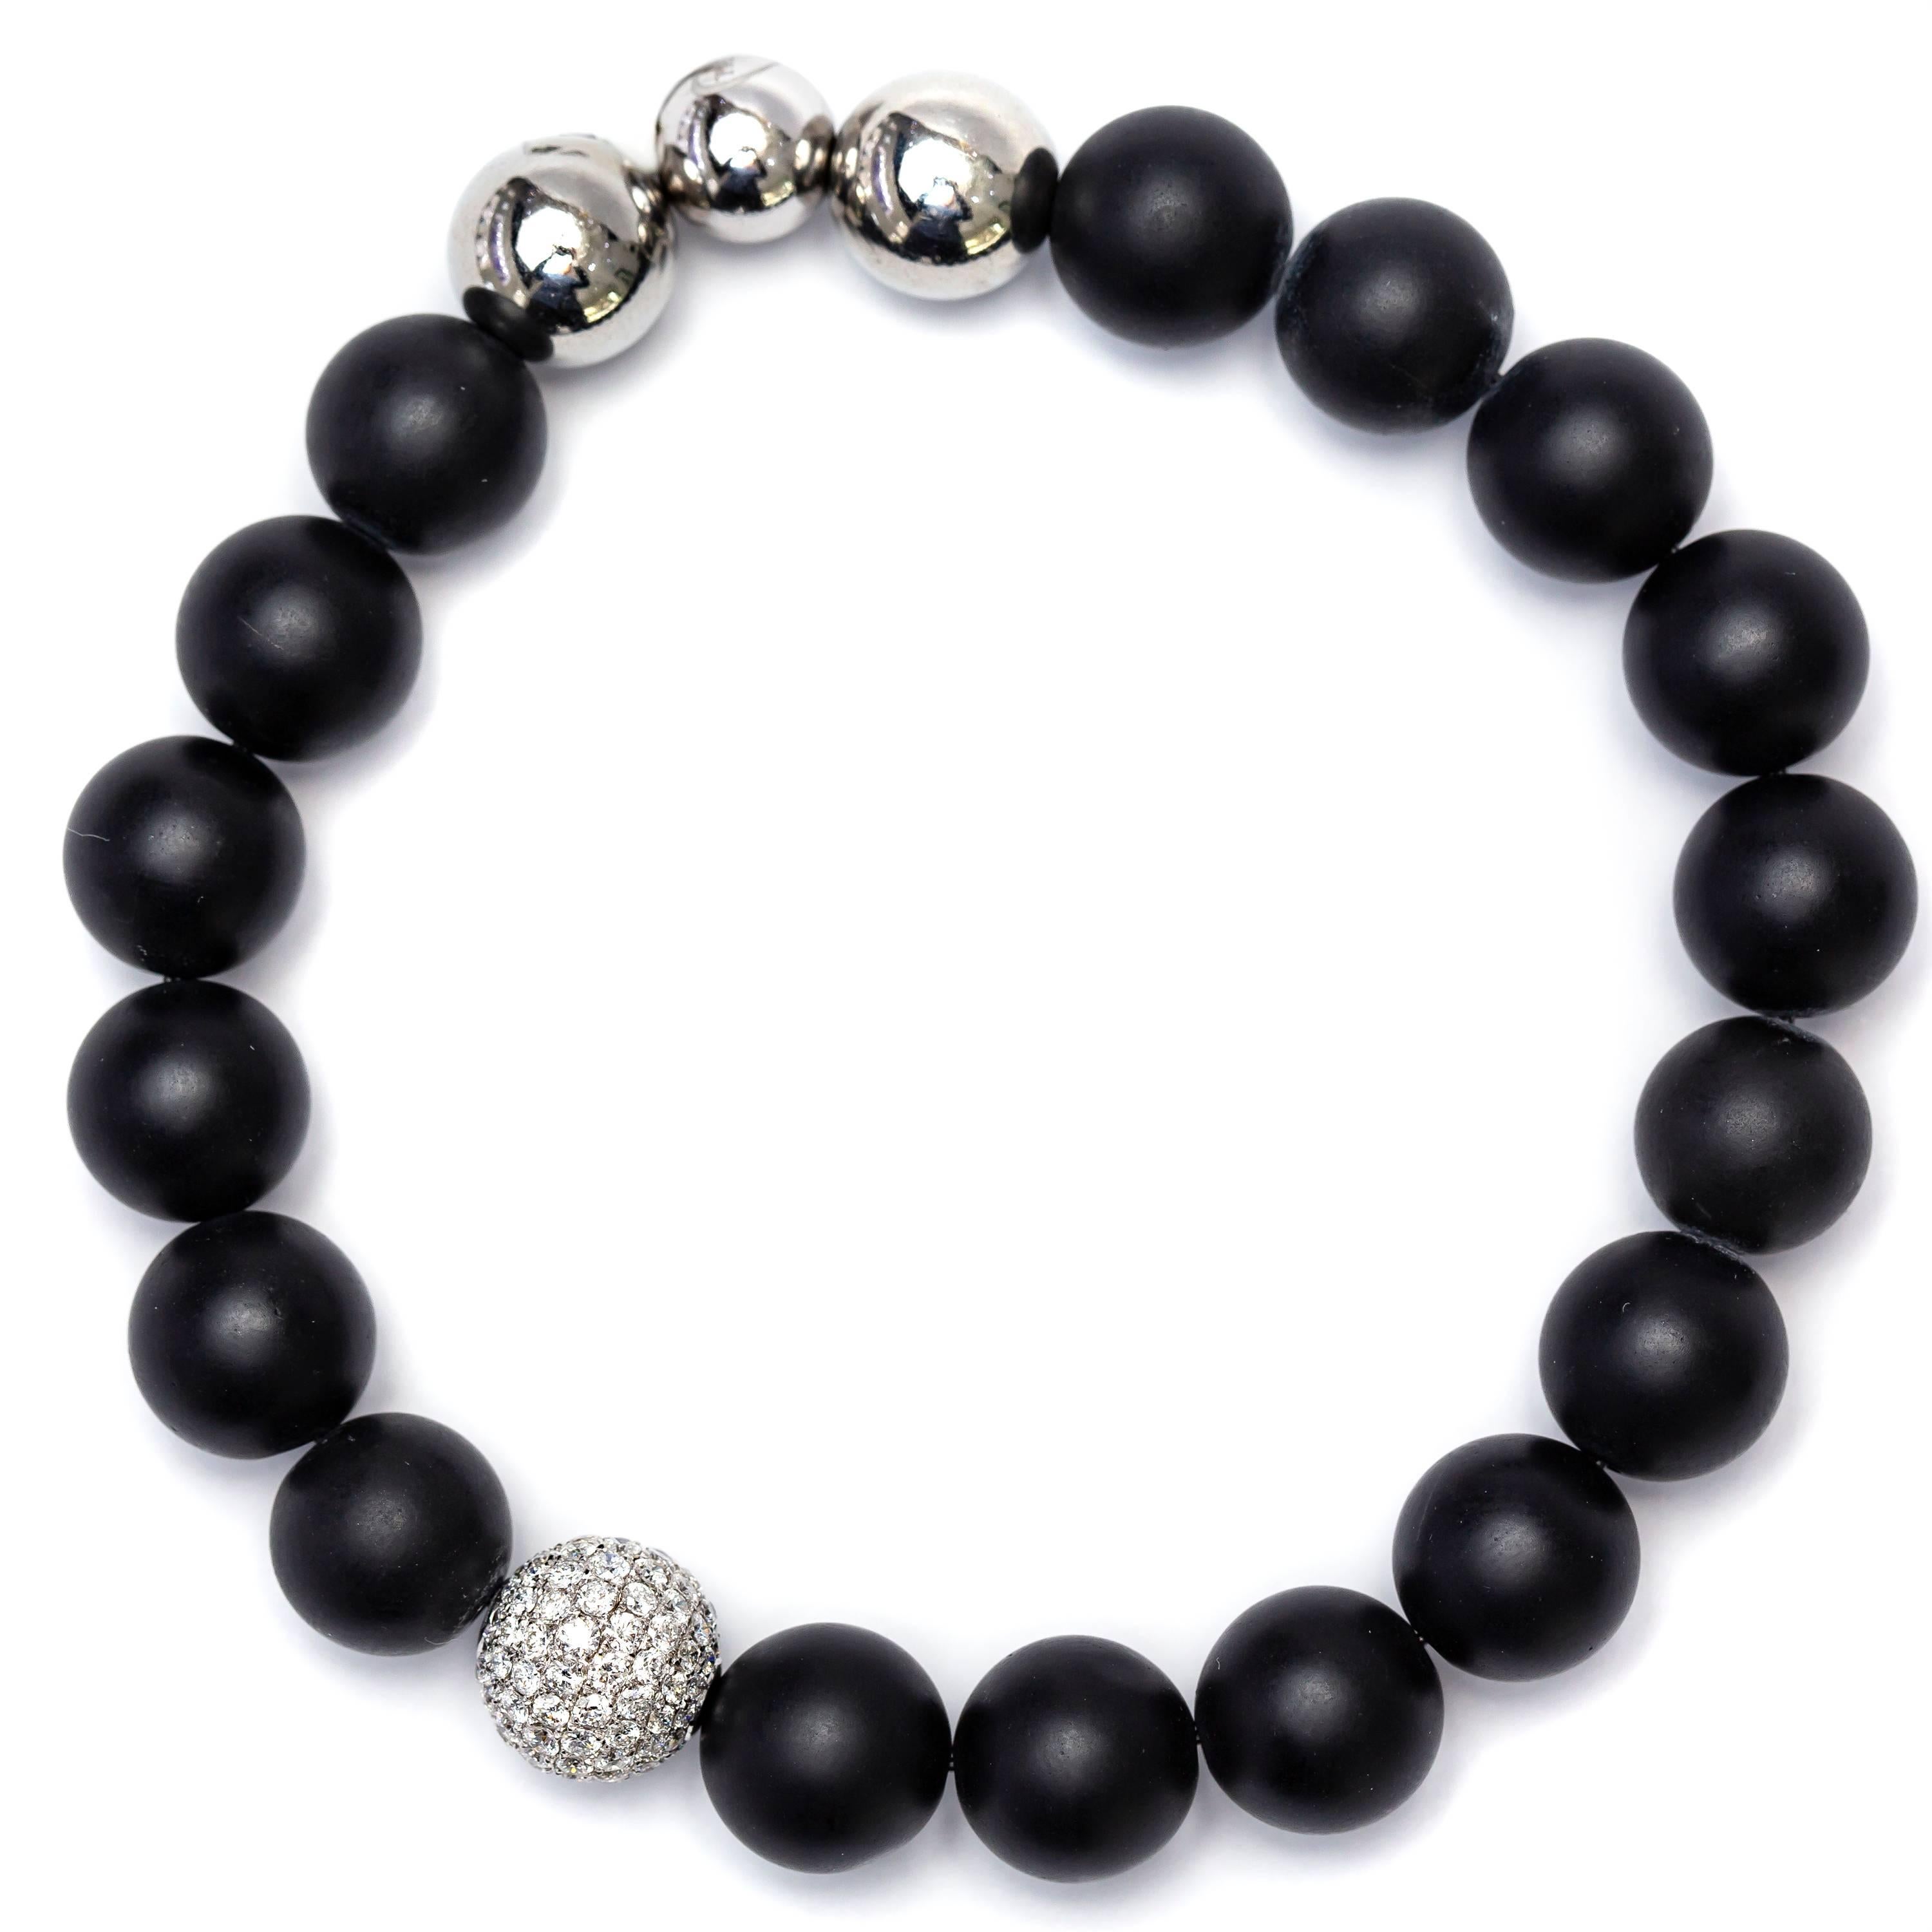 The Original Tresor Paris Bracelet Bespoke from the Jubilée collection featuring one Pave set diamond bead in 18 Karat White Gold, 3 stainless steel beads and 17 matte Black satin agate beads. Size will fit from 7.00 to 8.50 inches (17.78 cm to